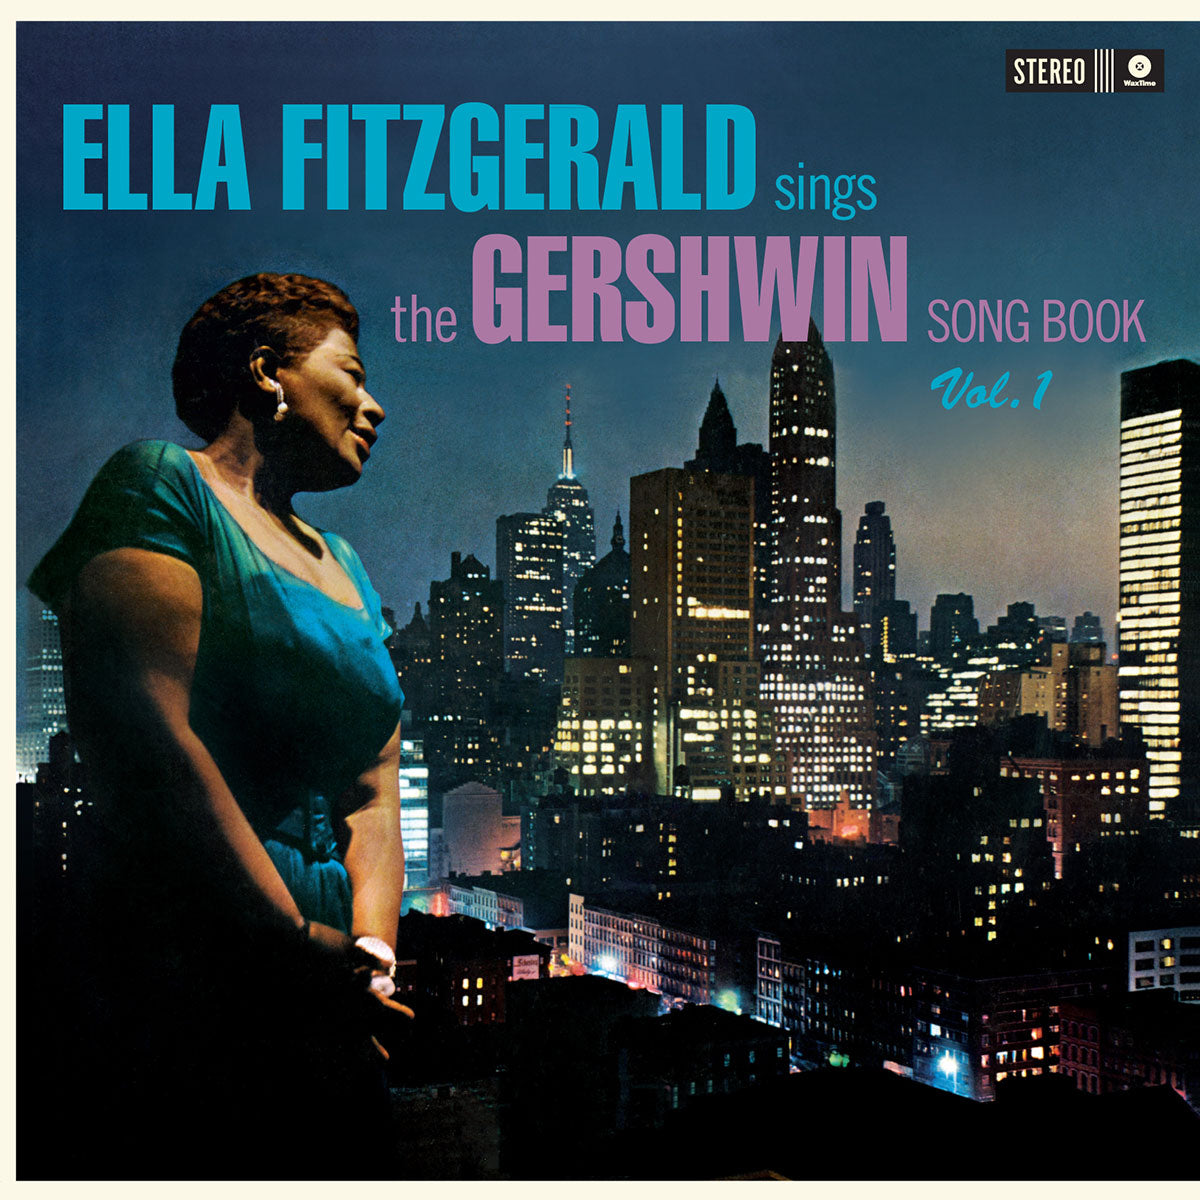 Sings from the Gershwin Song Book Vol. 1